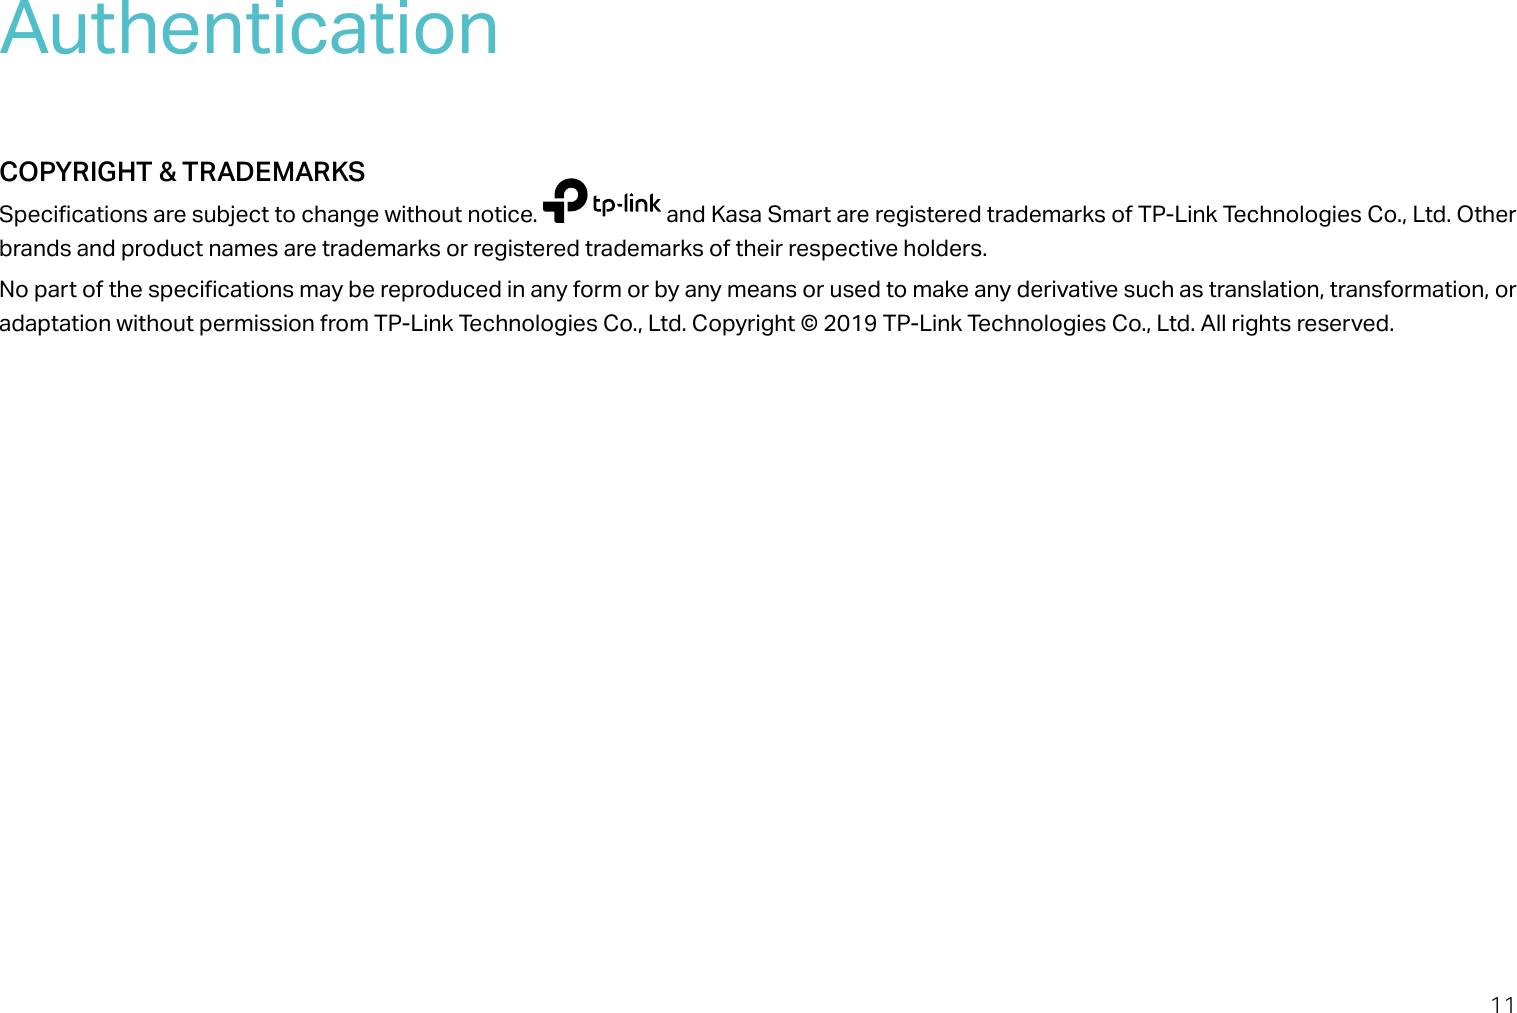 11AuthenticationCOPYRIGHT &amp; TRADEMARKSSpecifications are subject to change without notice.   and Kasa Smart are registered trademarks of TP-Link Technologies Co., Ltd. Other brands and product names are trademarks or registered trademarks of their respective holders.No part of the specifications may be reproduced in any form or by any means or used to make any derivative such as translation, transformation, or adaptation without permission from TP-Link Technologies Co., Ltd. Copyright © 2019 TP-Link Technologies Co., Ltd. All rights reserved.